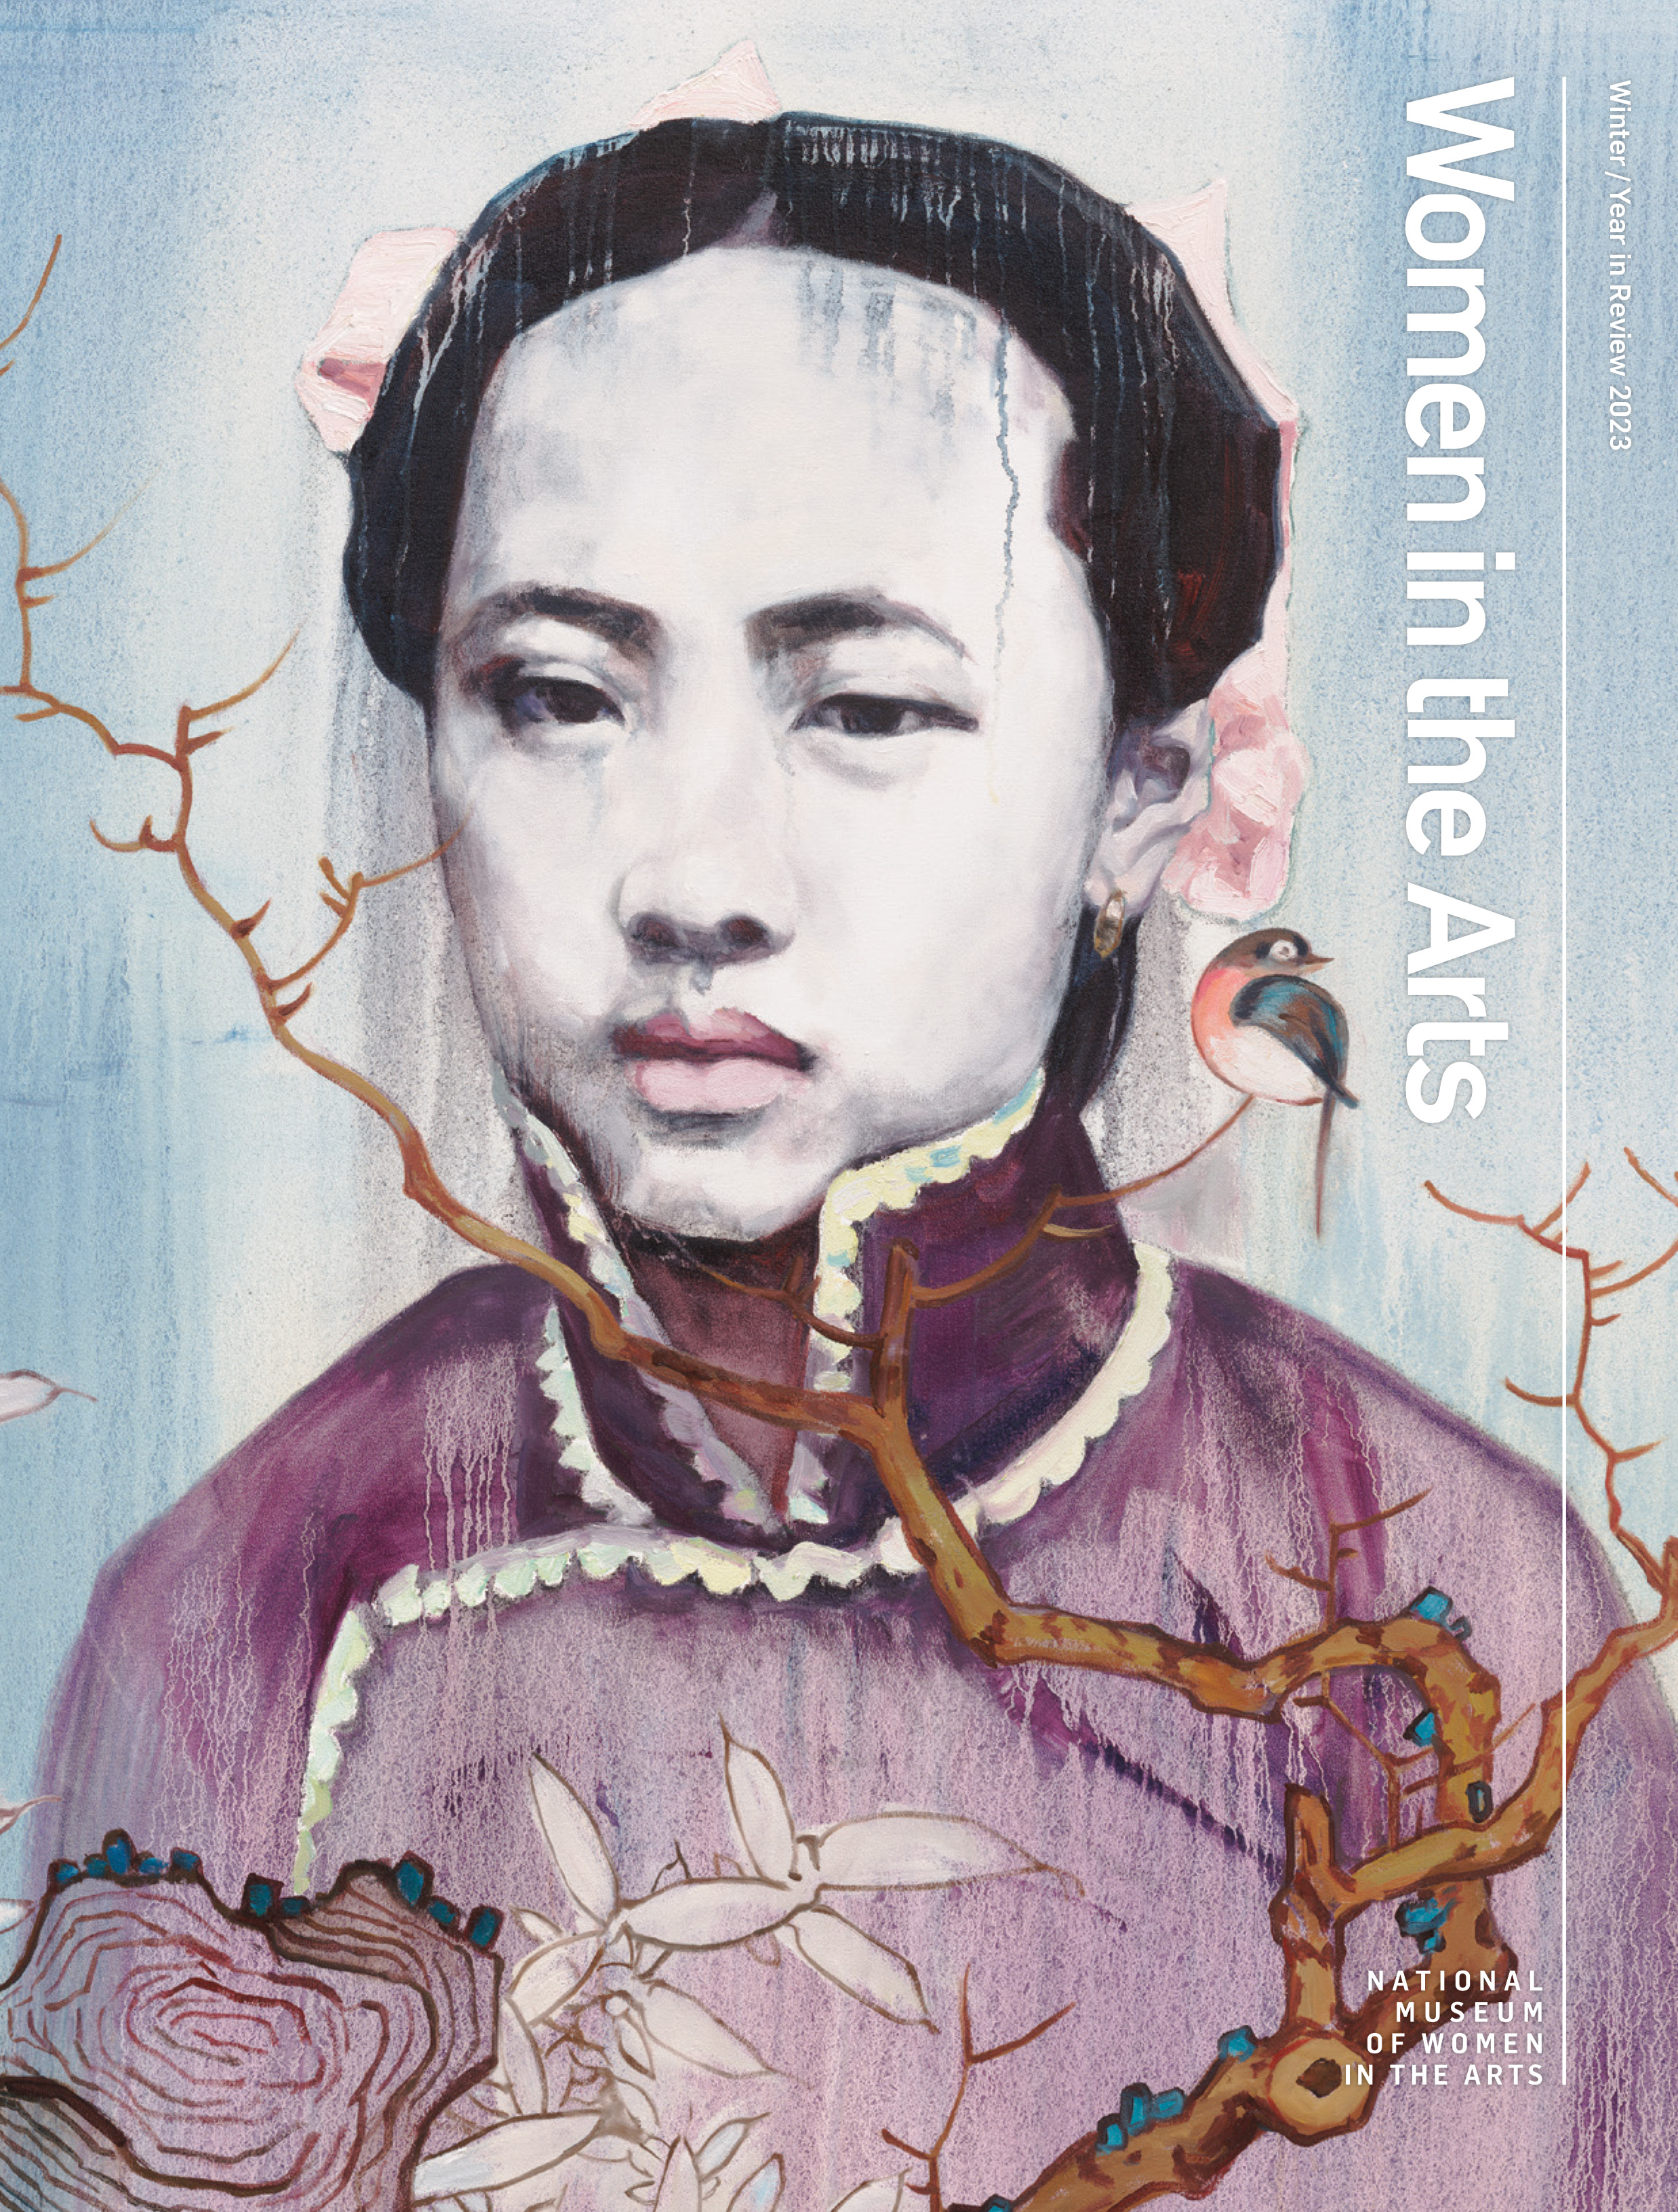 A magazine cover with a painting with layered, dripping textures shows a Chinese woman with dark hair wearing a traditional dress. She gazes toward the viewer. In front of her, a tree branch extends upward, and a bird perches on its tip.